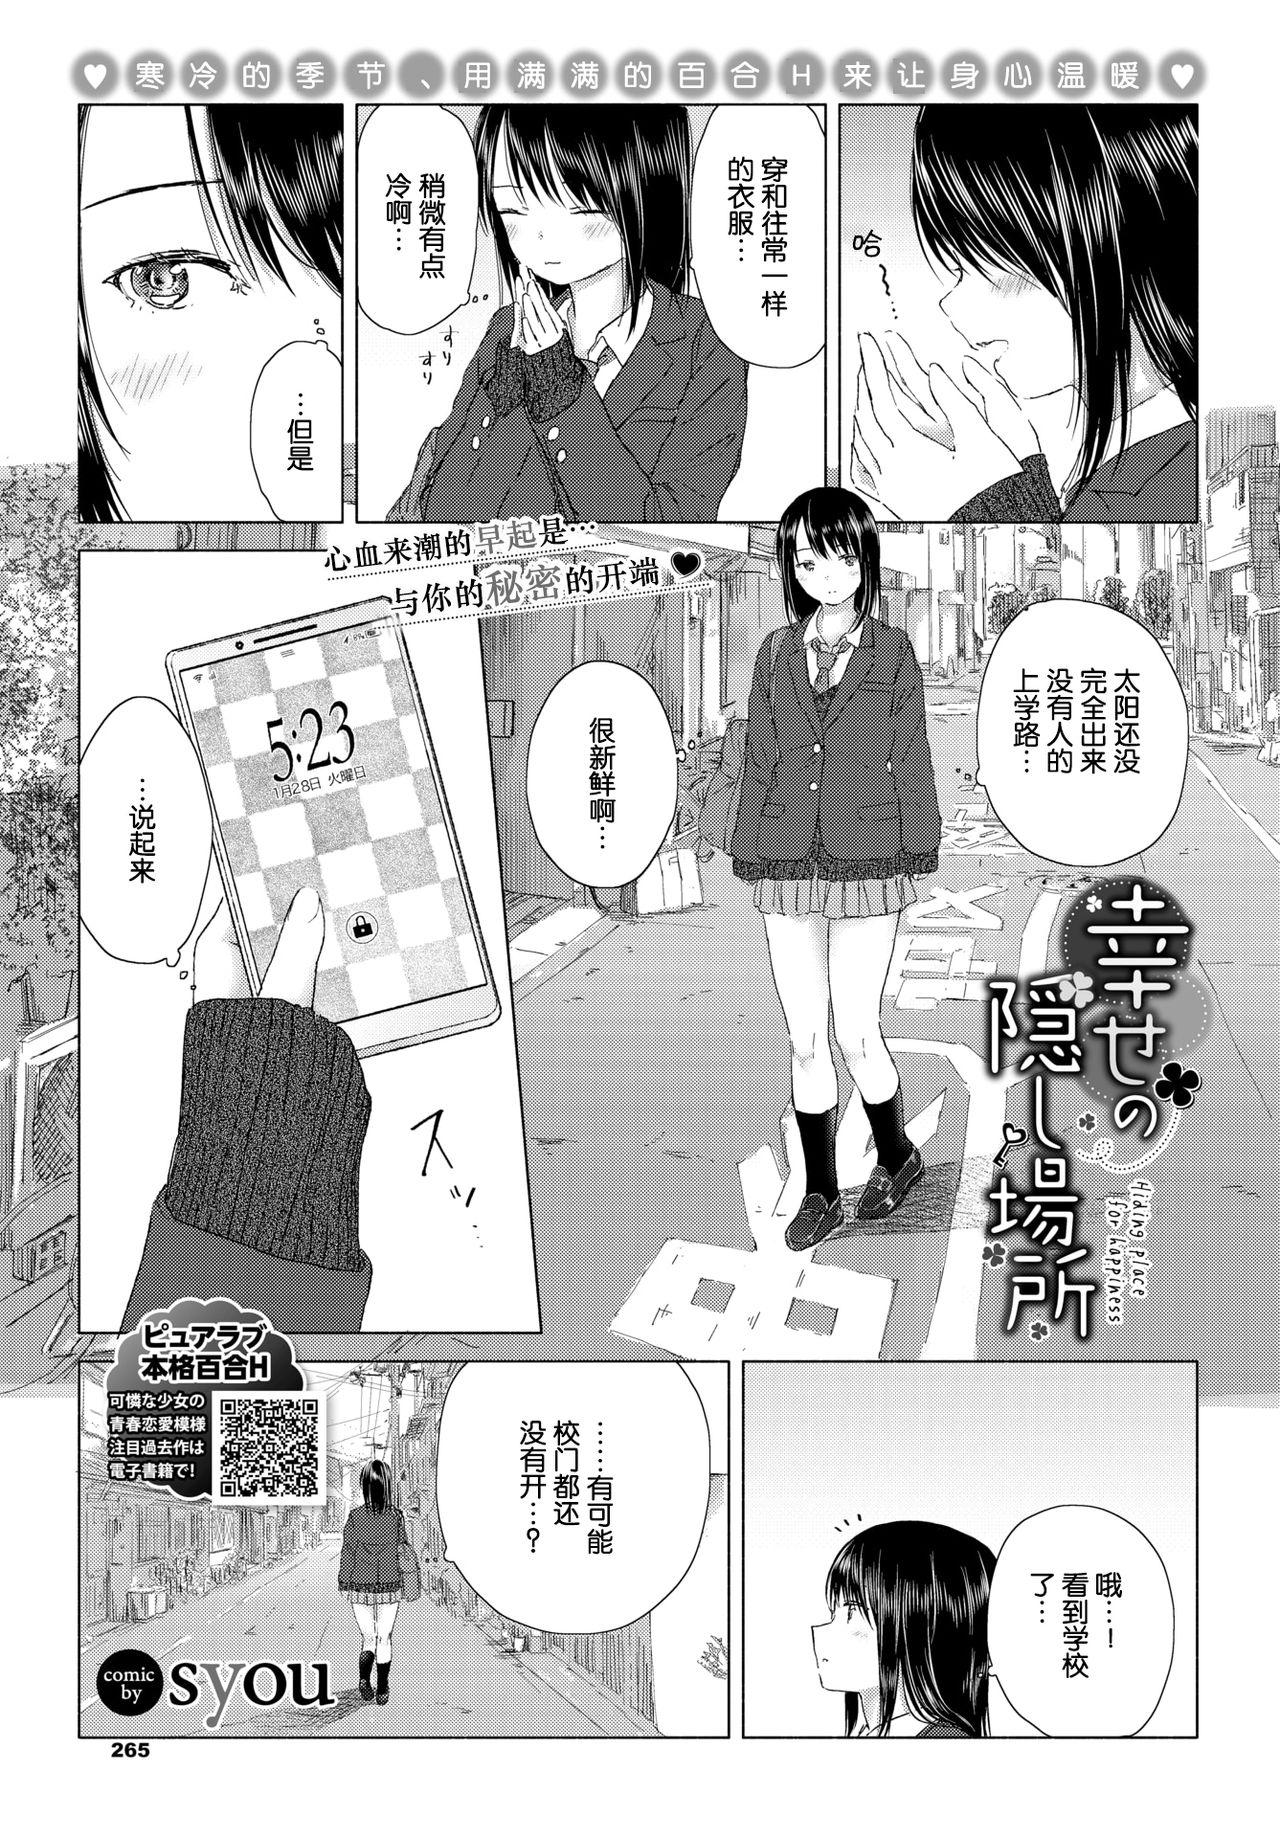 Wet Cunt Shiawase no Kakushi Basho - Hiding place for happiness Bedroom - Page 2